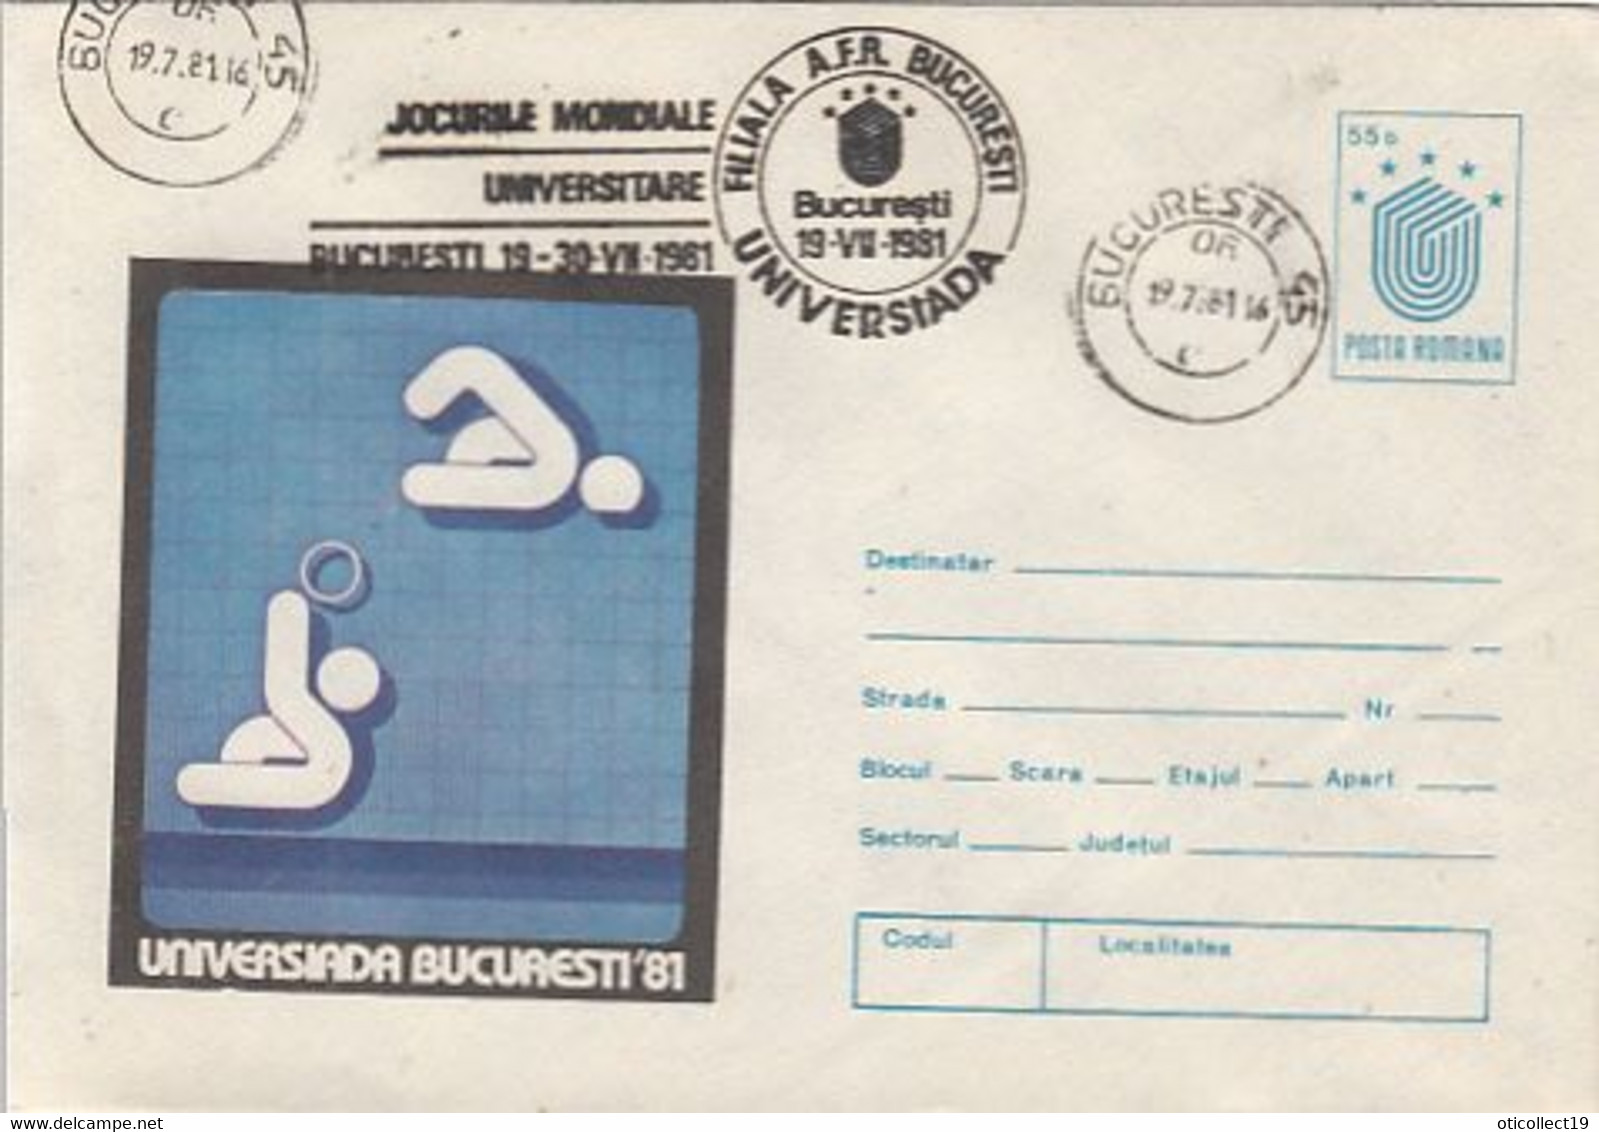 SPORTS, WATER POLO, WORLD UNIVERSITY GAMES, COVER STATIONERY, 1981, ROMANIA - Wasserball